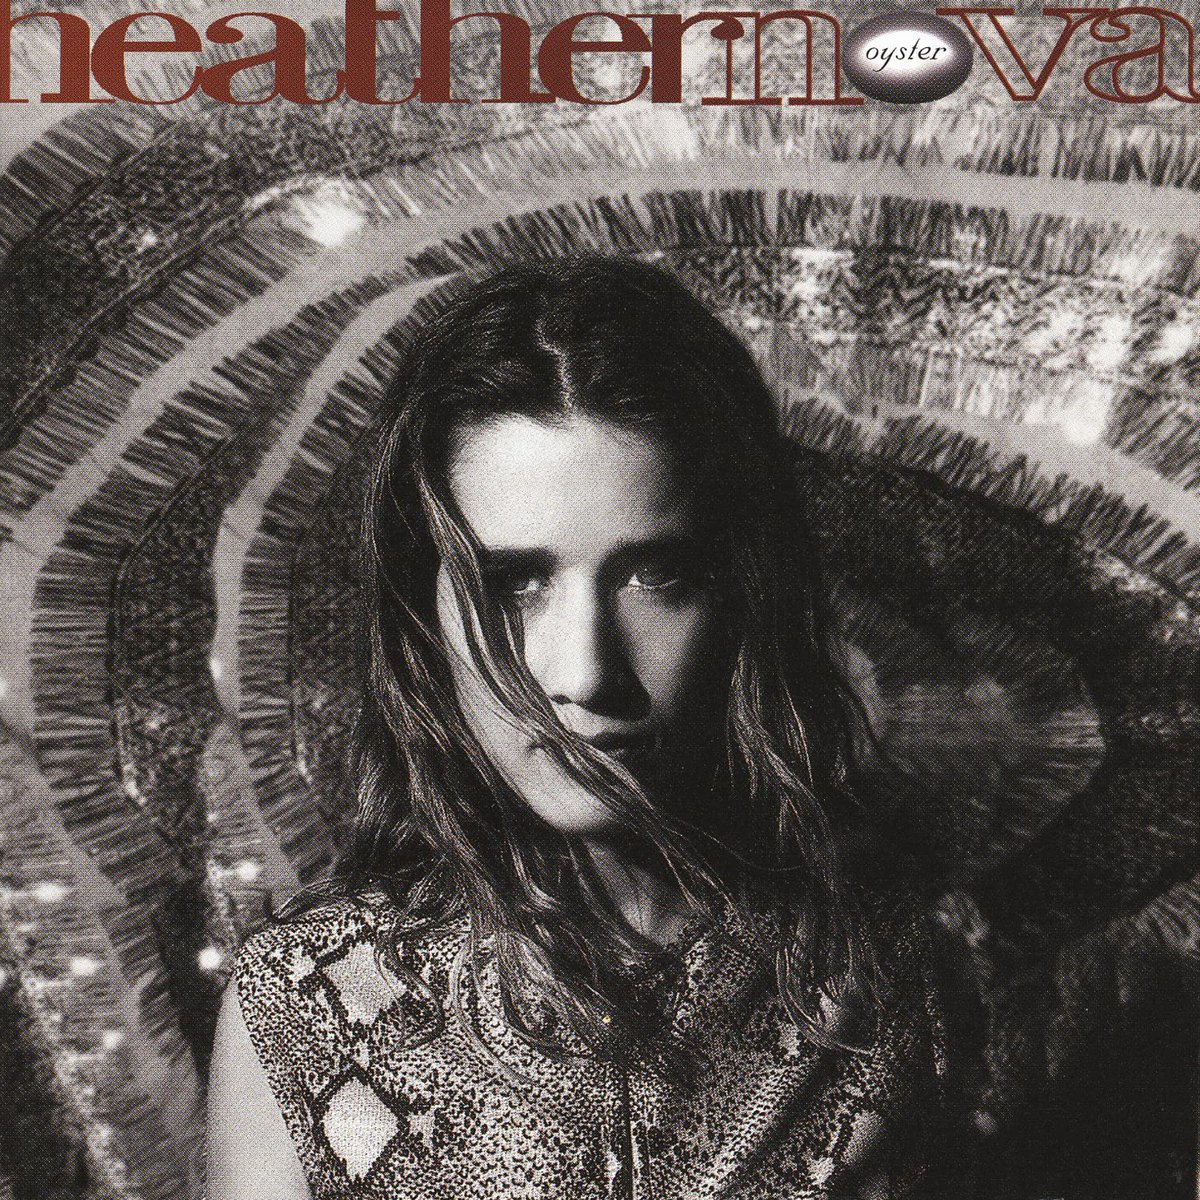 #FemaleVoices Day 1: Heather Nova - Sugar Had to pick this lady to start things off. Beautiful voice and great song craft somewhere between folk and alternative rock. Don't let the soft intro fool you, this song rocks out. youtu.be/uLH_qJPQhvg